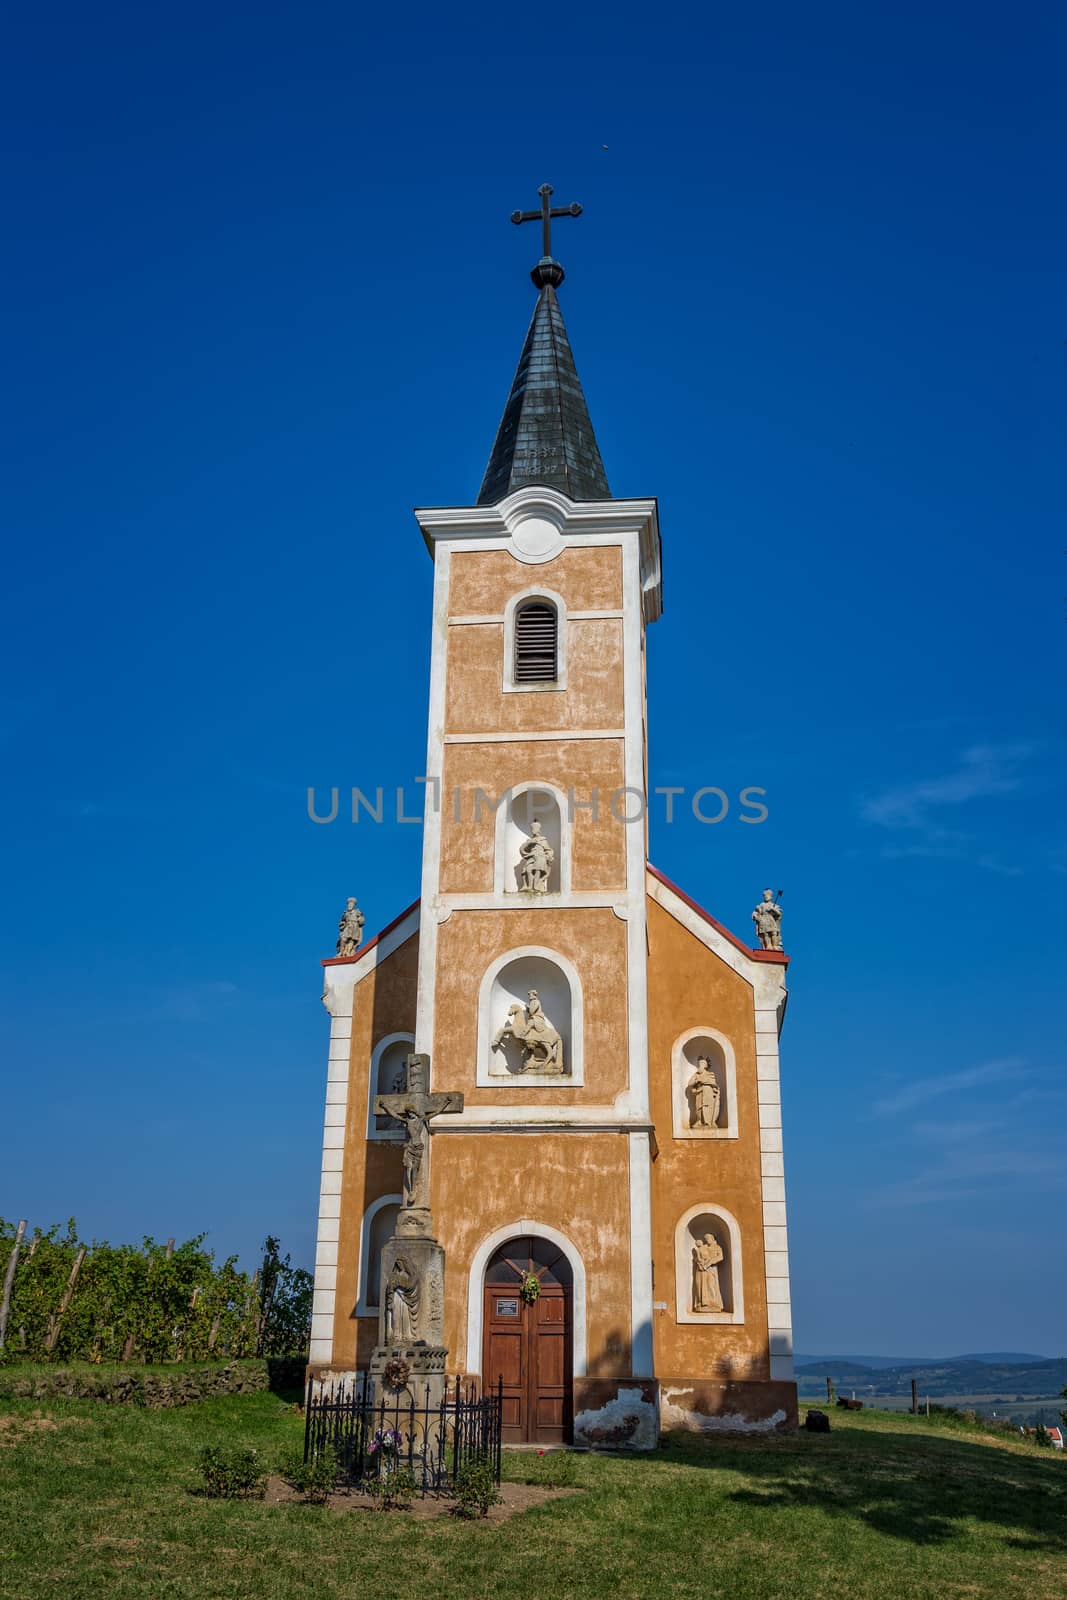 Beautiful old chapel from Hungary by Digoarpi